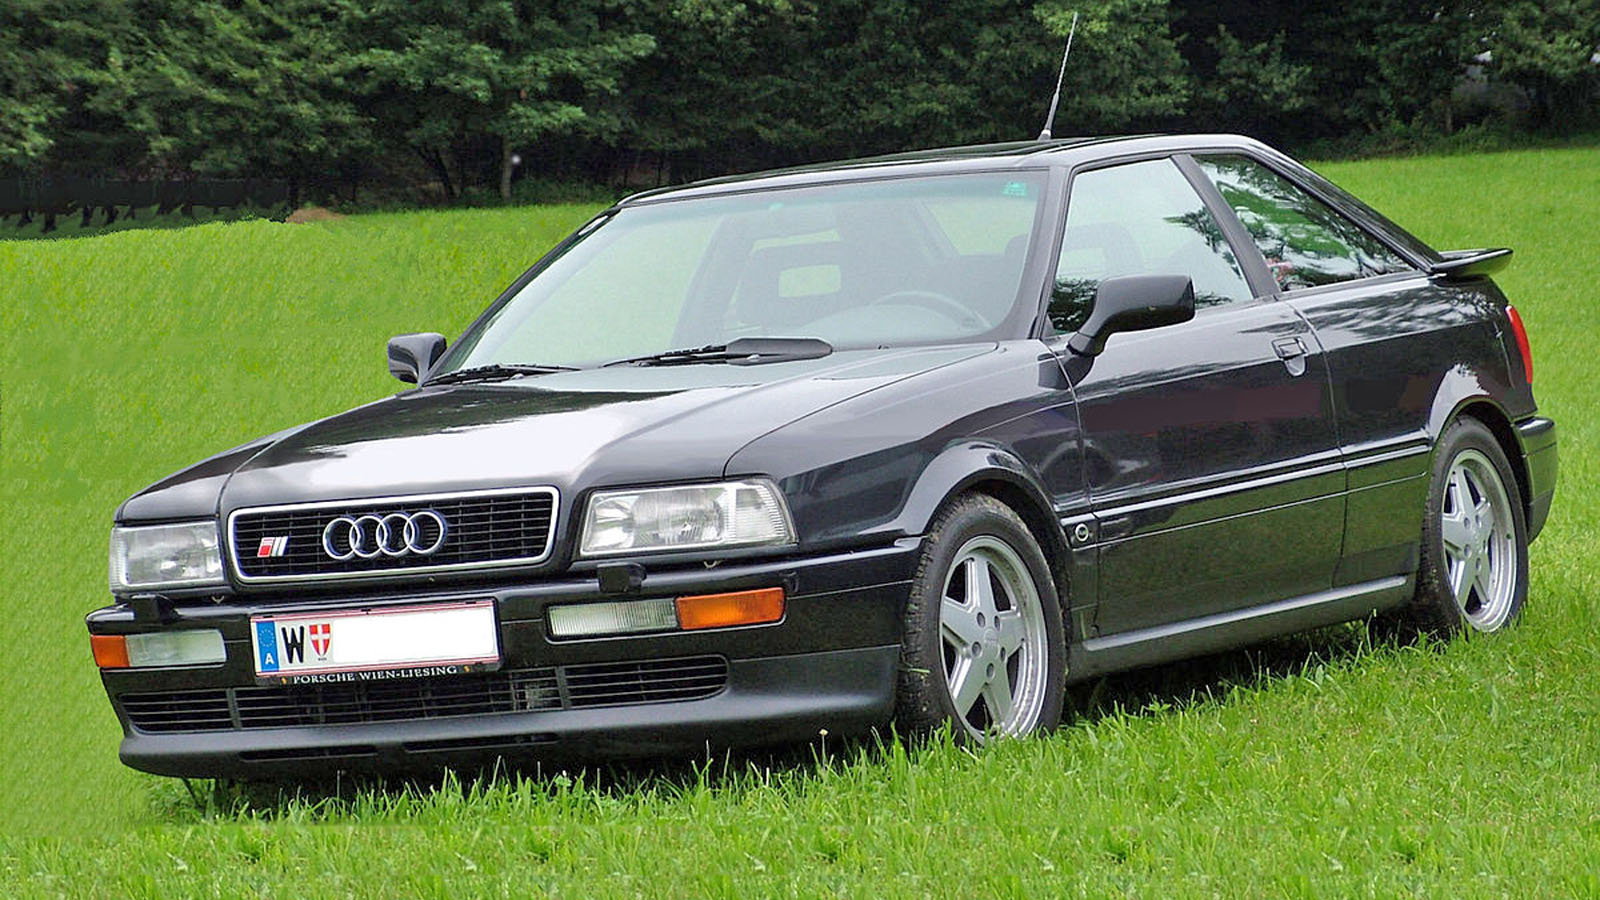 The Top 5 Audi Models Sadly Never Made it to the States